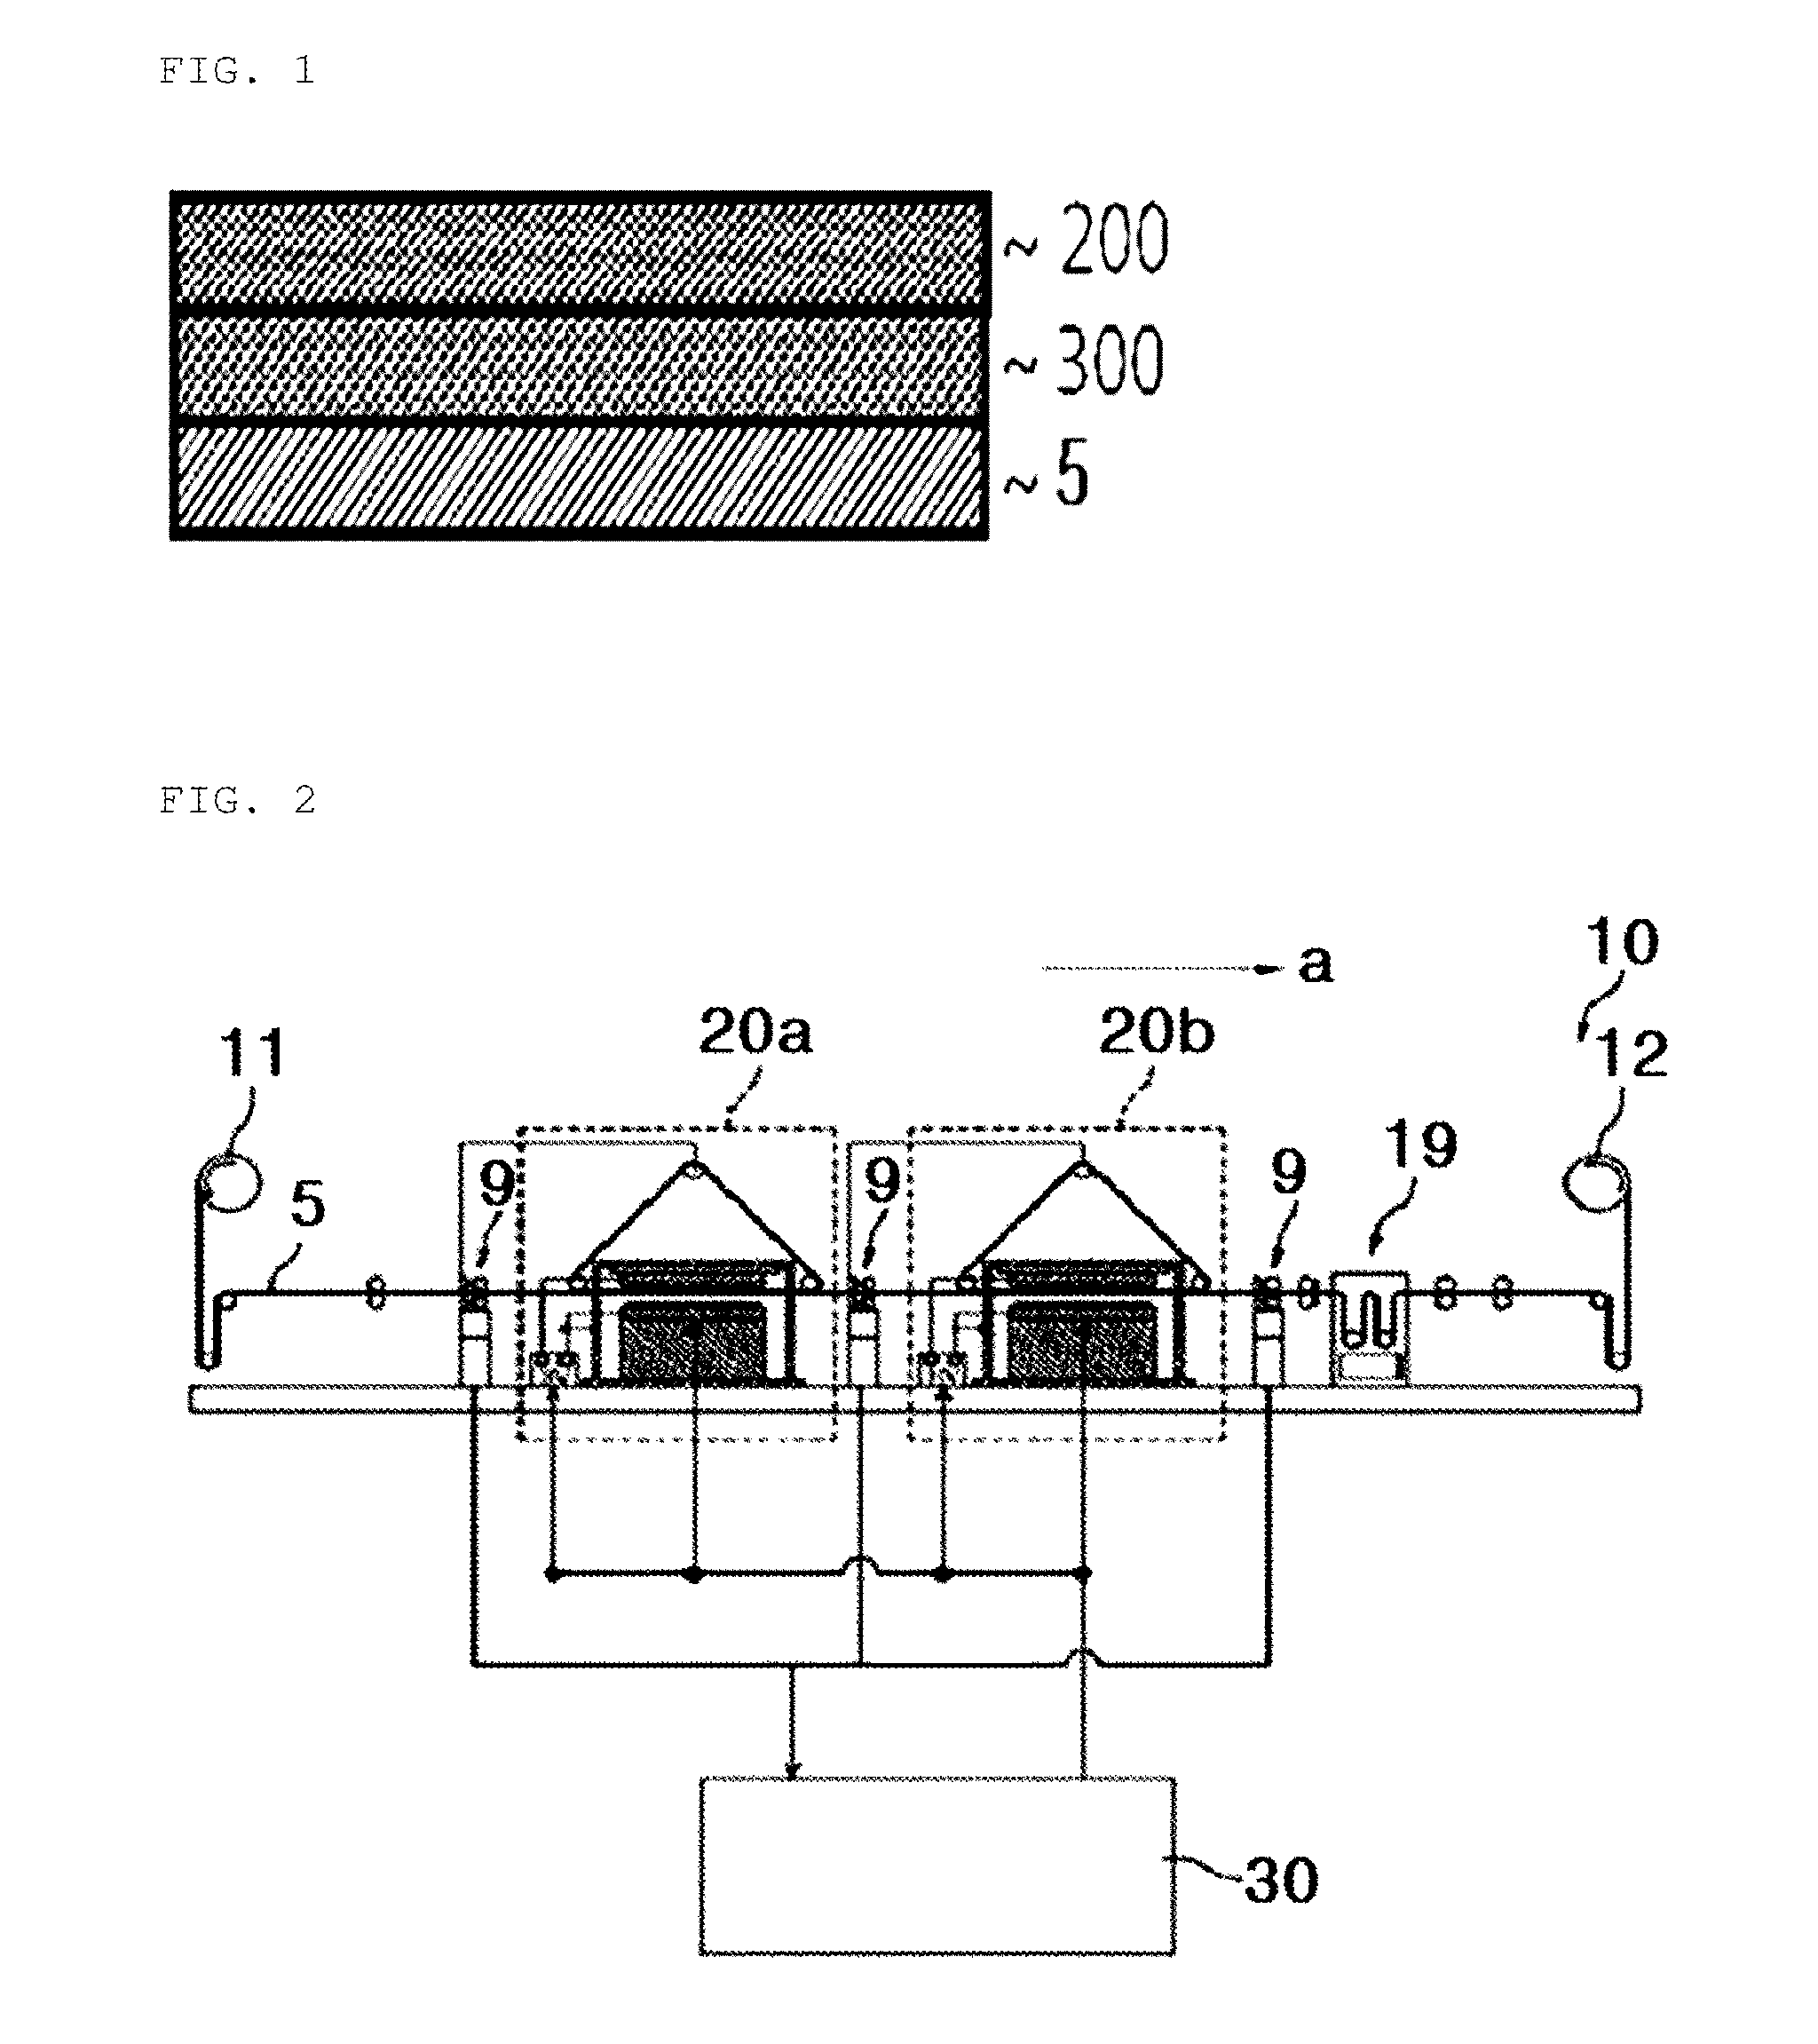 Multi-layered nanofiber medium using electro-blowing, melt-blowing or electrospinning, and method for manufacturing same